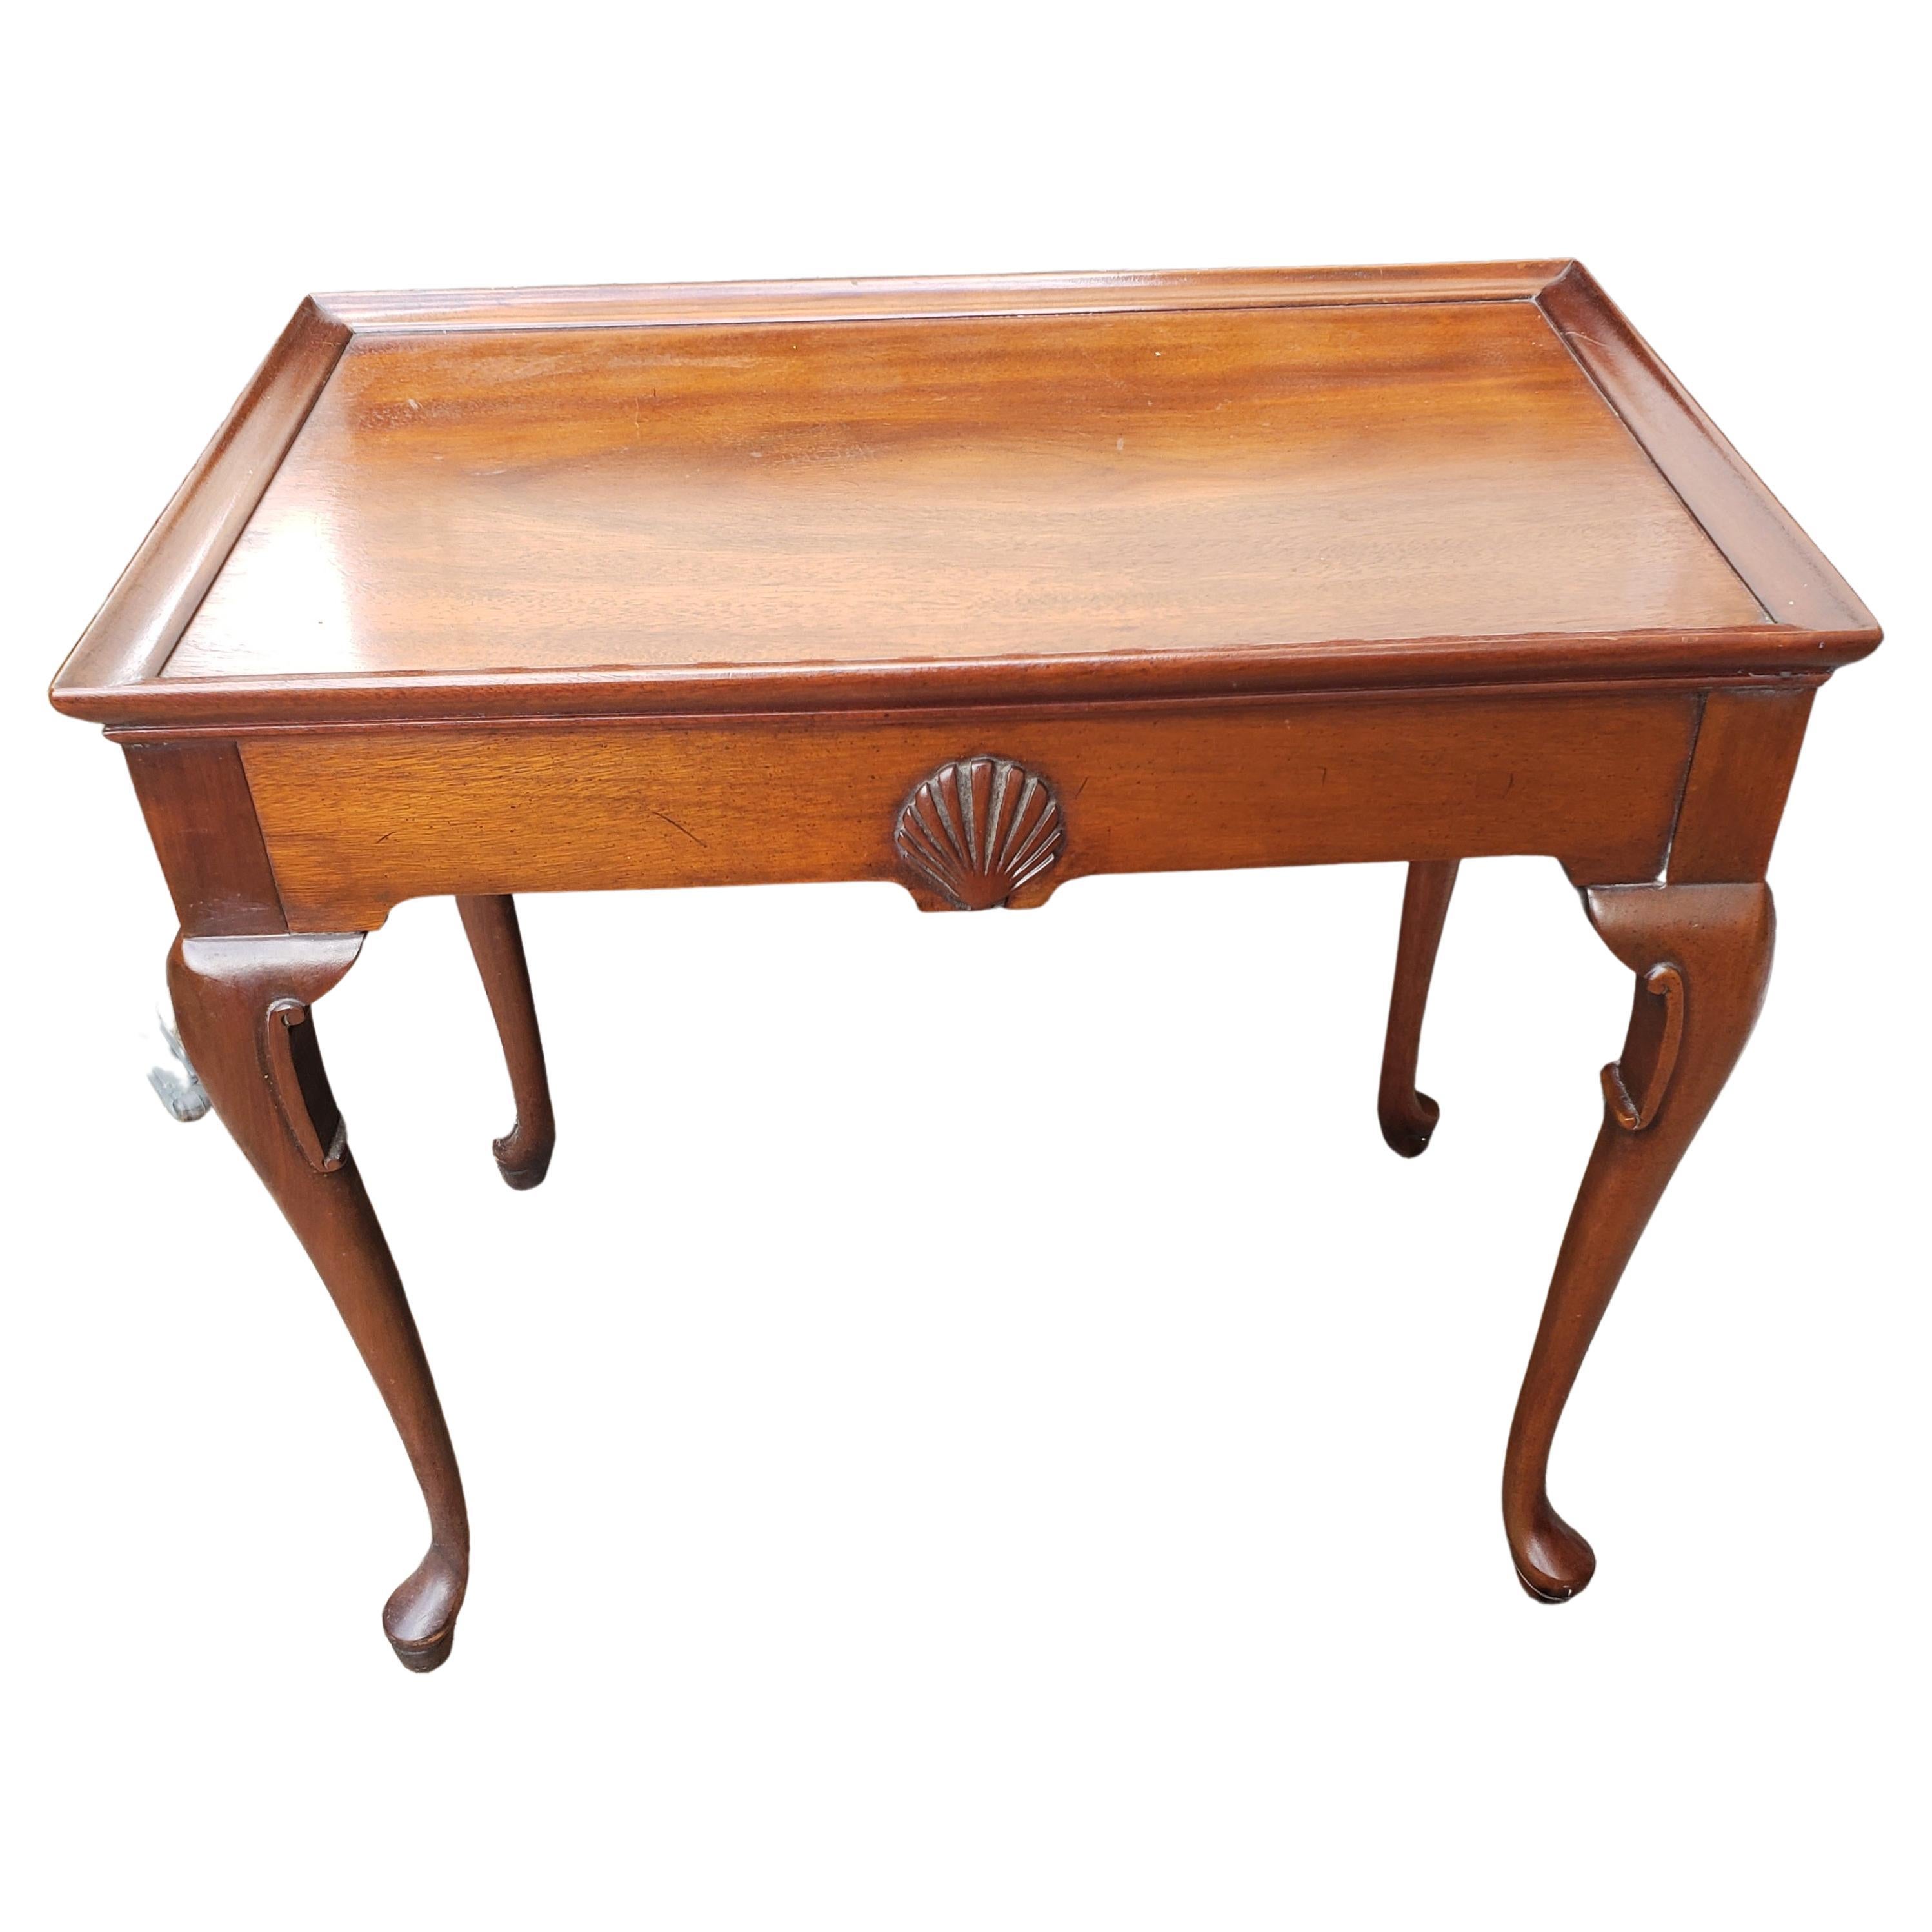 1950s English Mahogany Queen Anne Tray Top Tea Table by Hickory Chair Co.